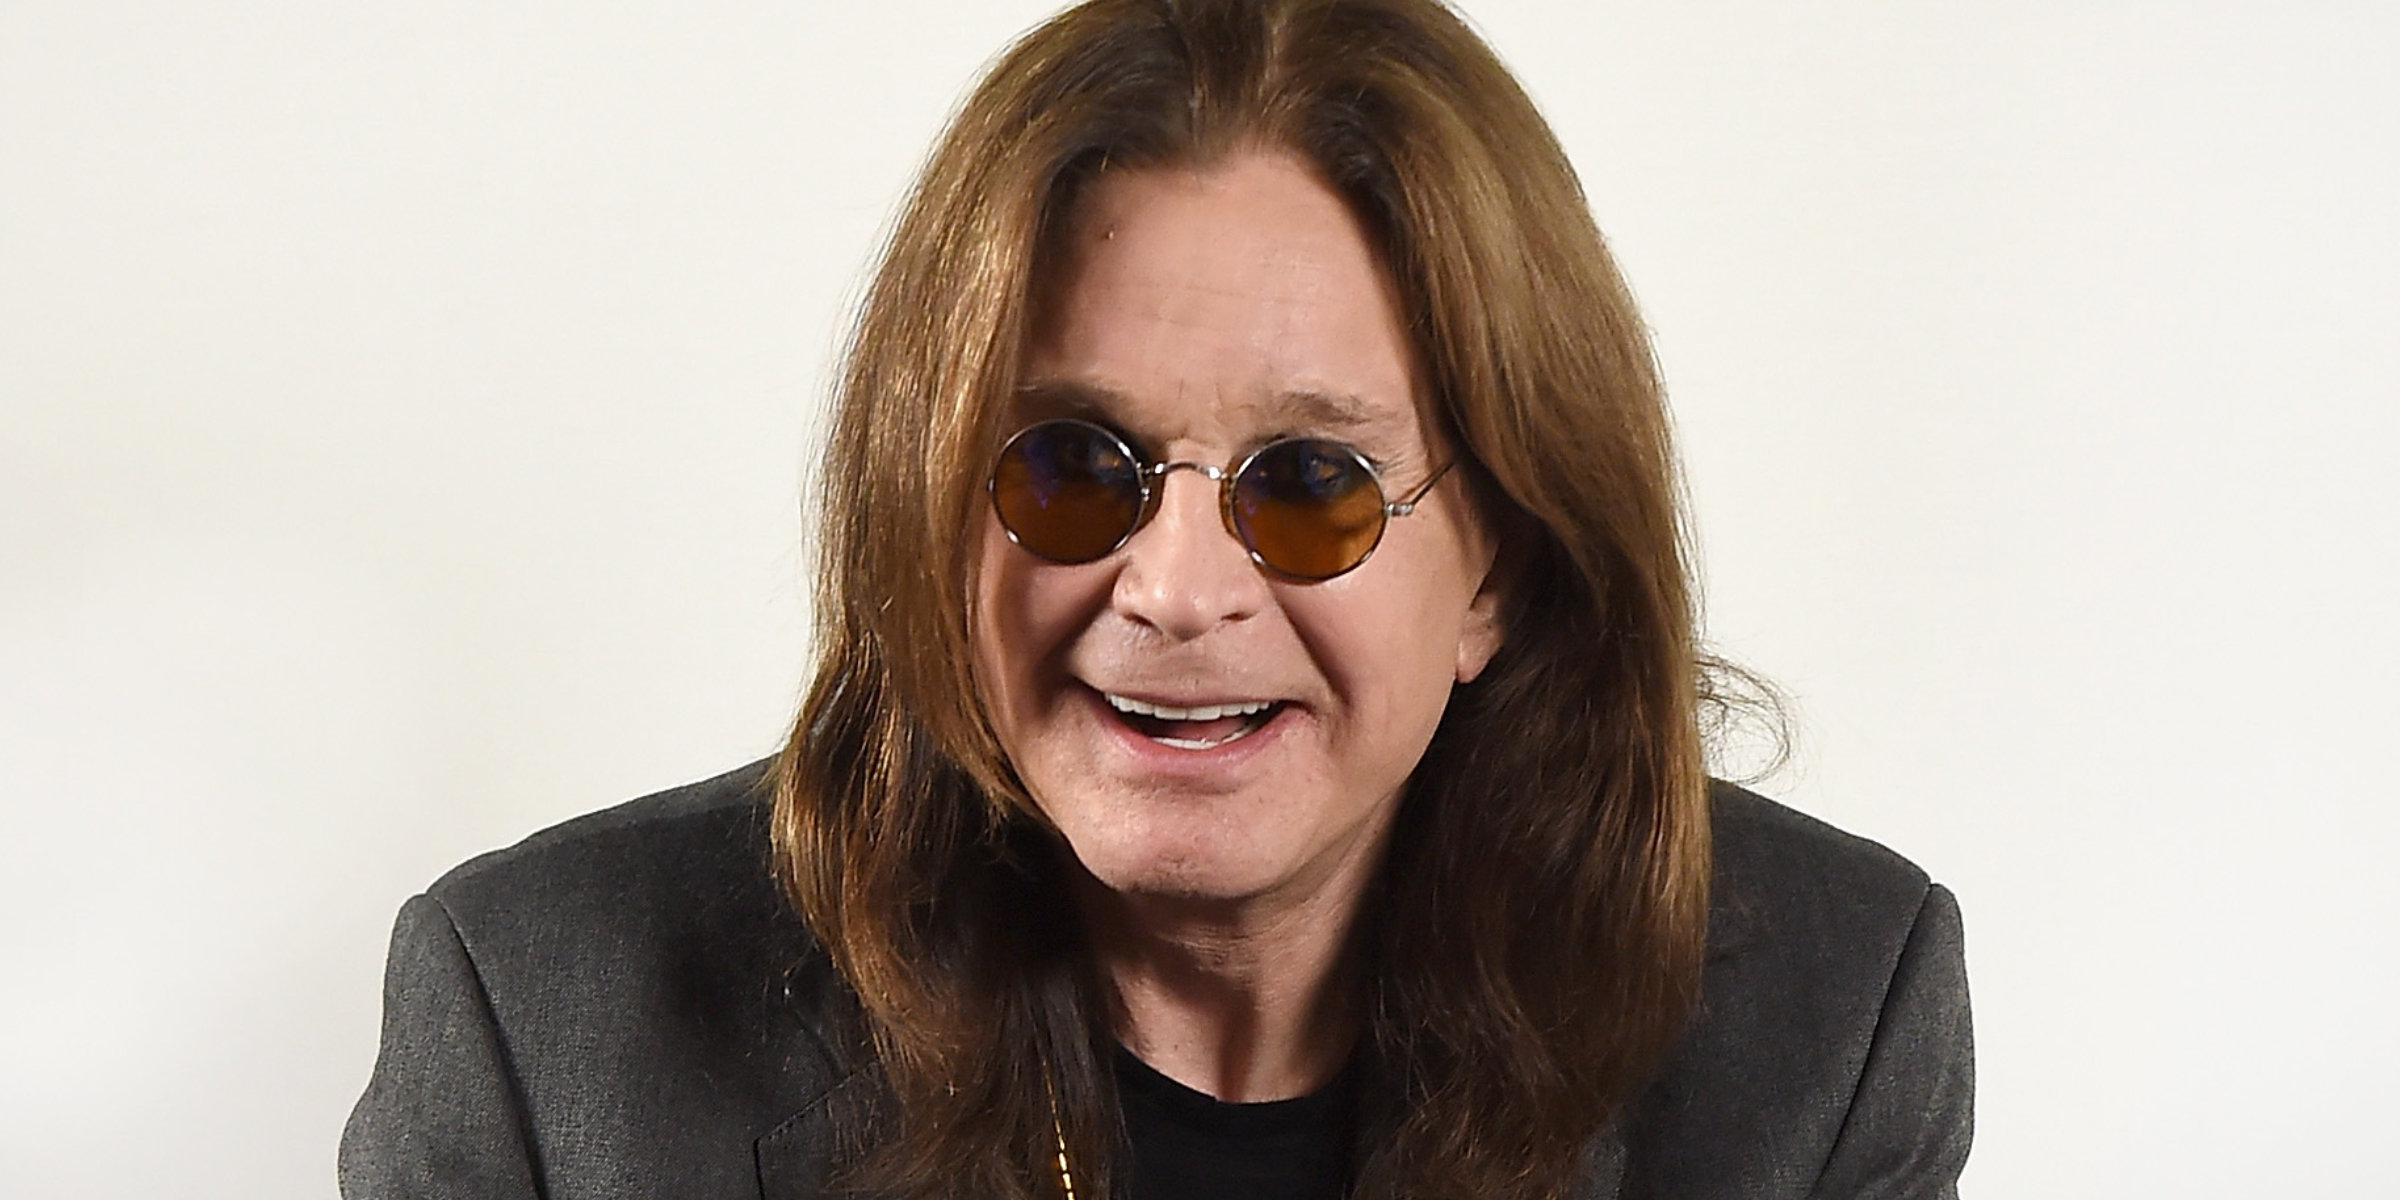 Ozzy Osbourne | Source: Getty Images